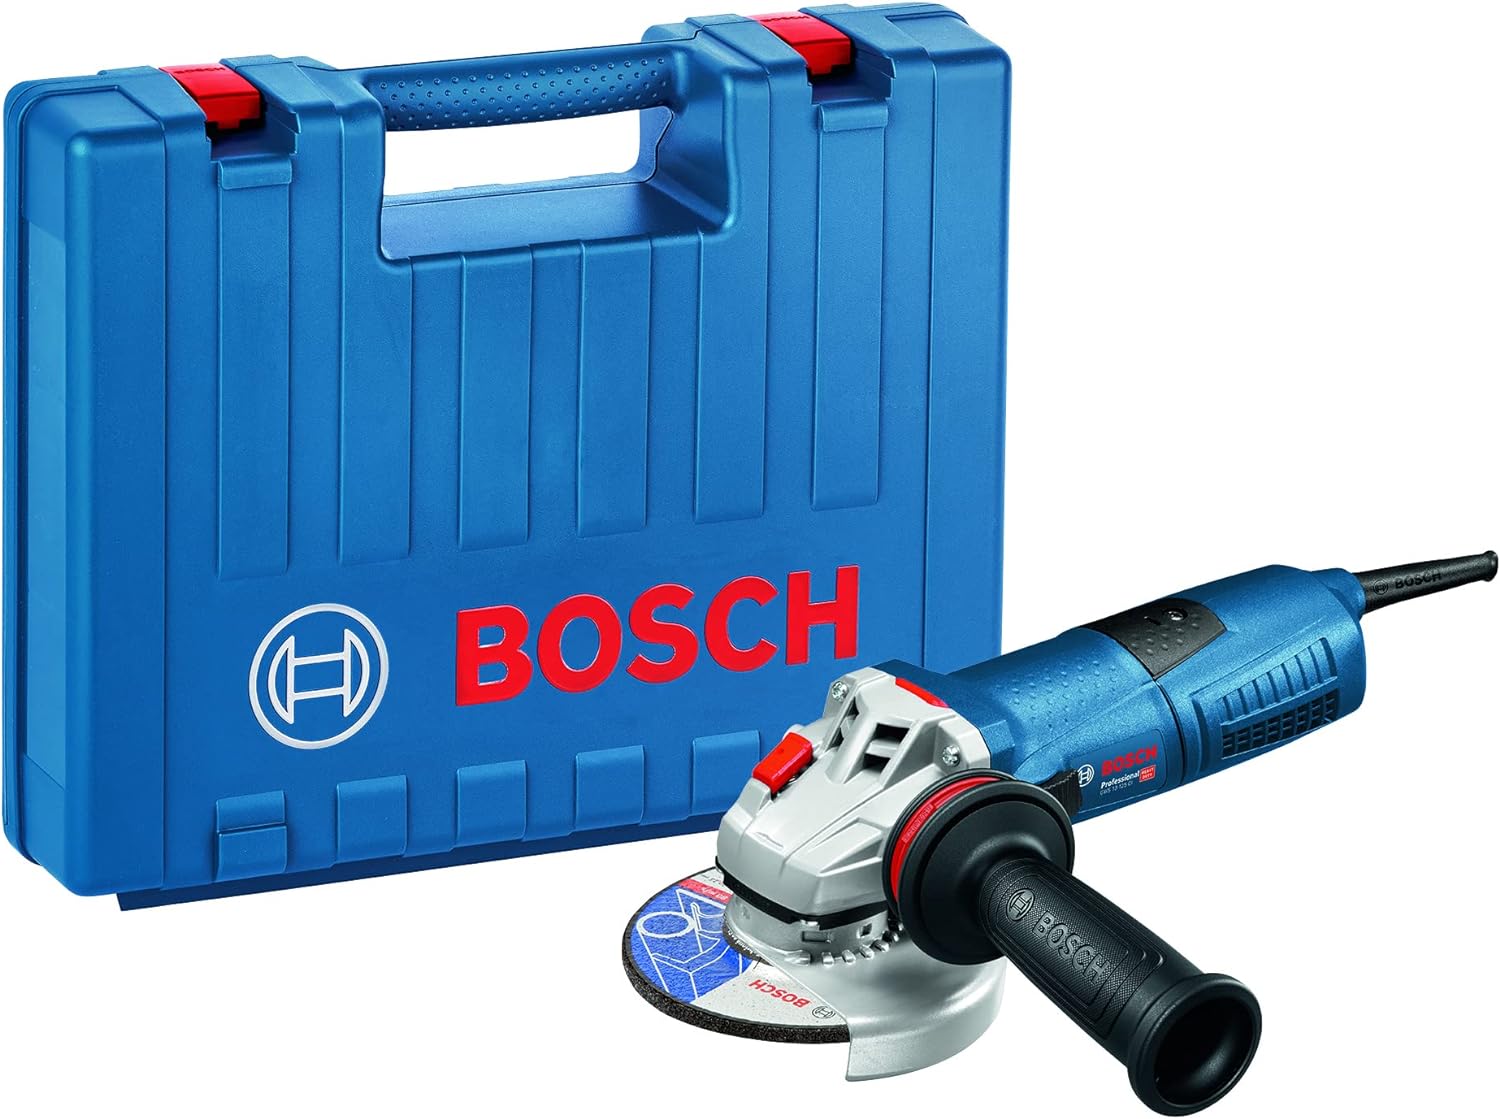 Bosch Professional Corded Angle Grinder GWS 13-125 CI (240V, 1.300W, incl. Backing Flange, Protective Guard, SDS Quick-Locking nut, Vibration Control Auxiliary Handle, in Carrying case)